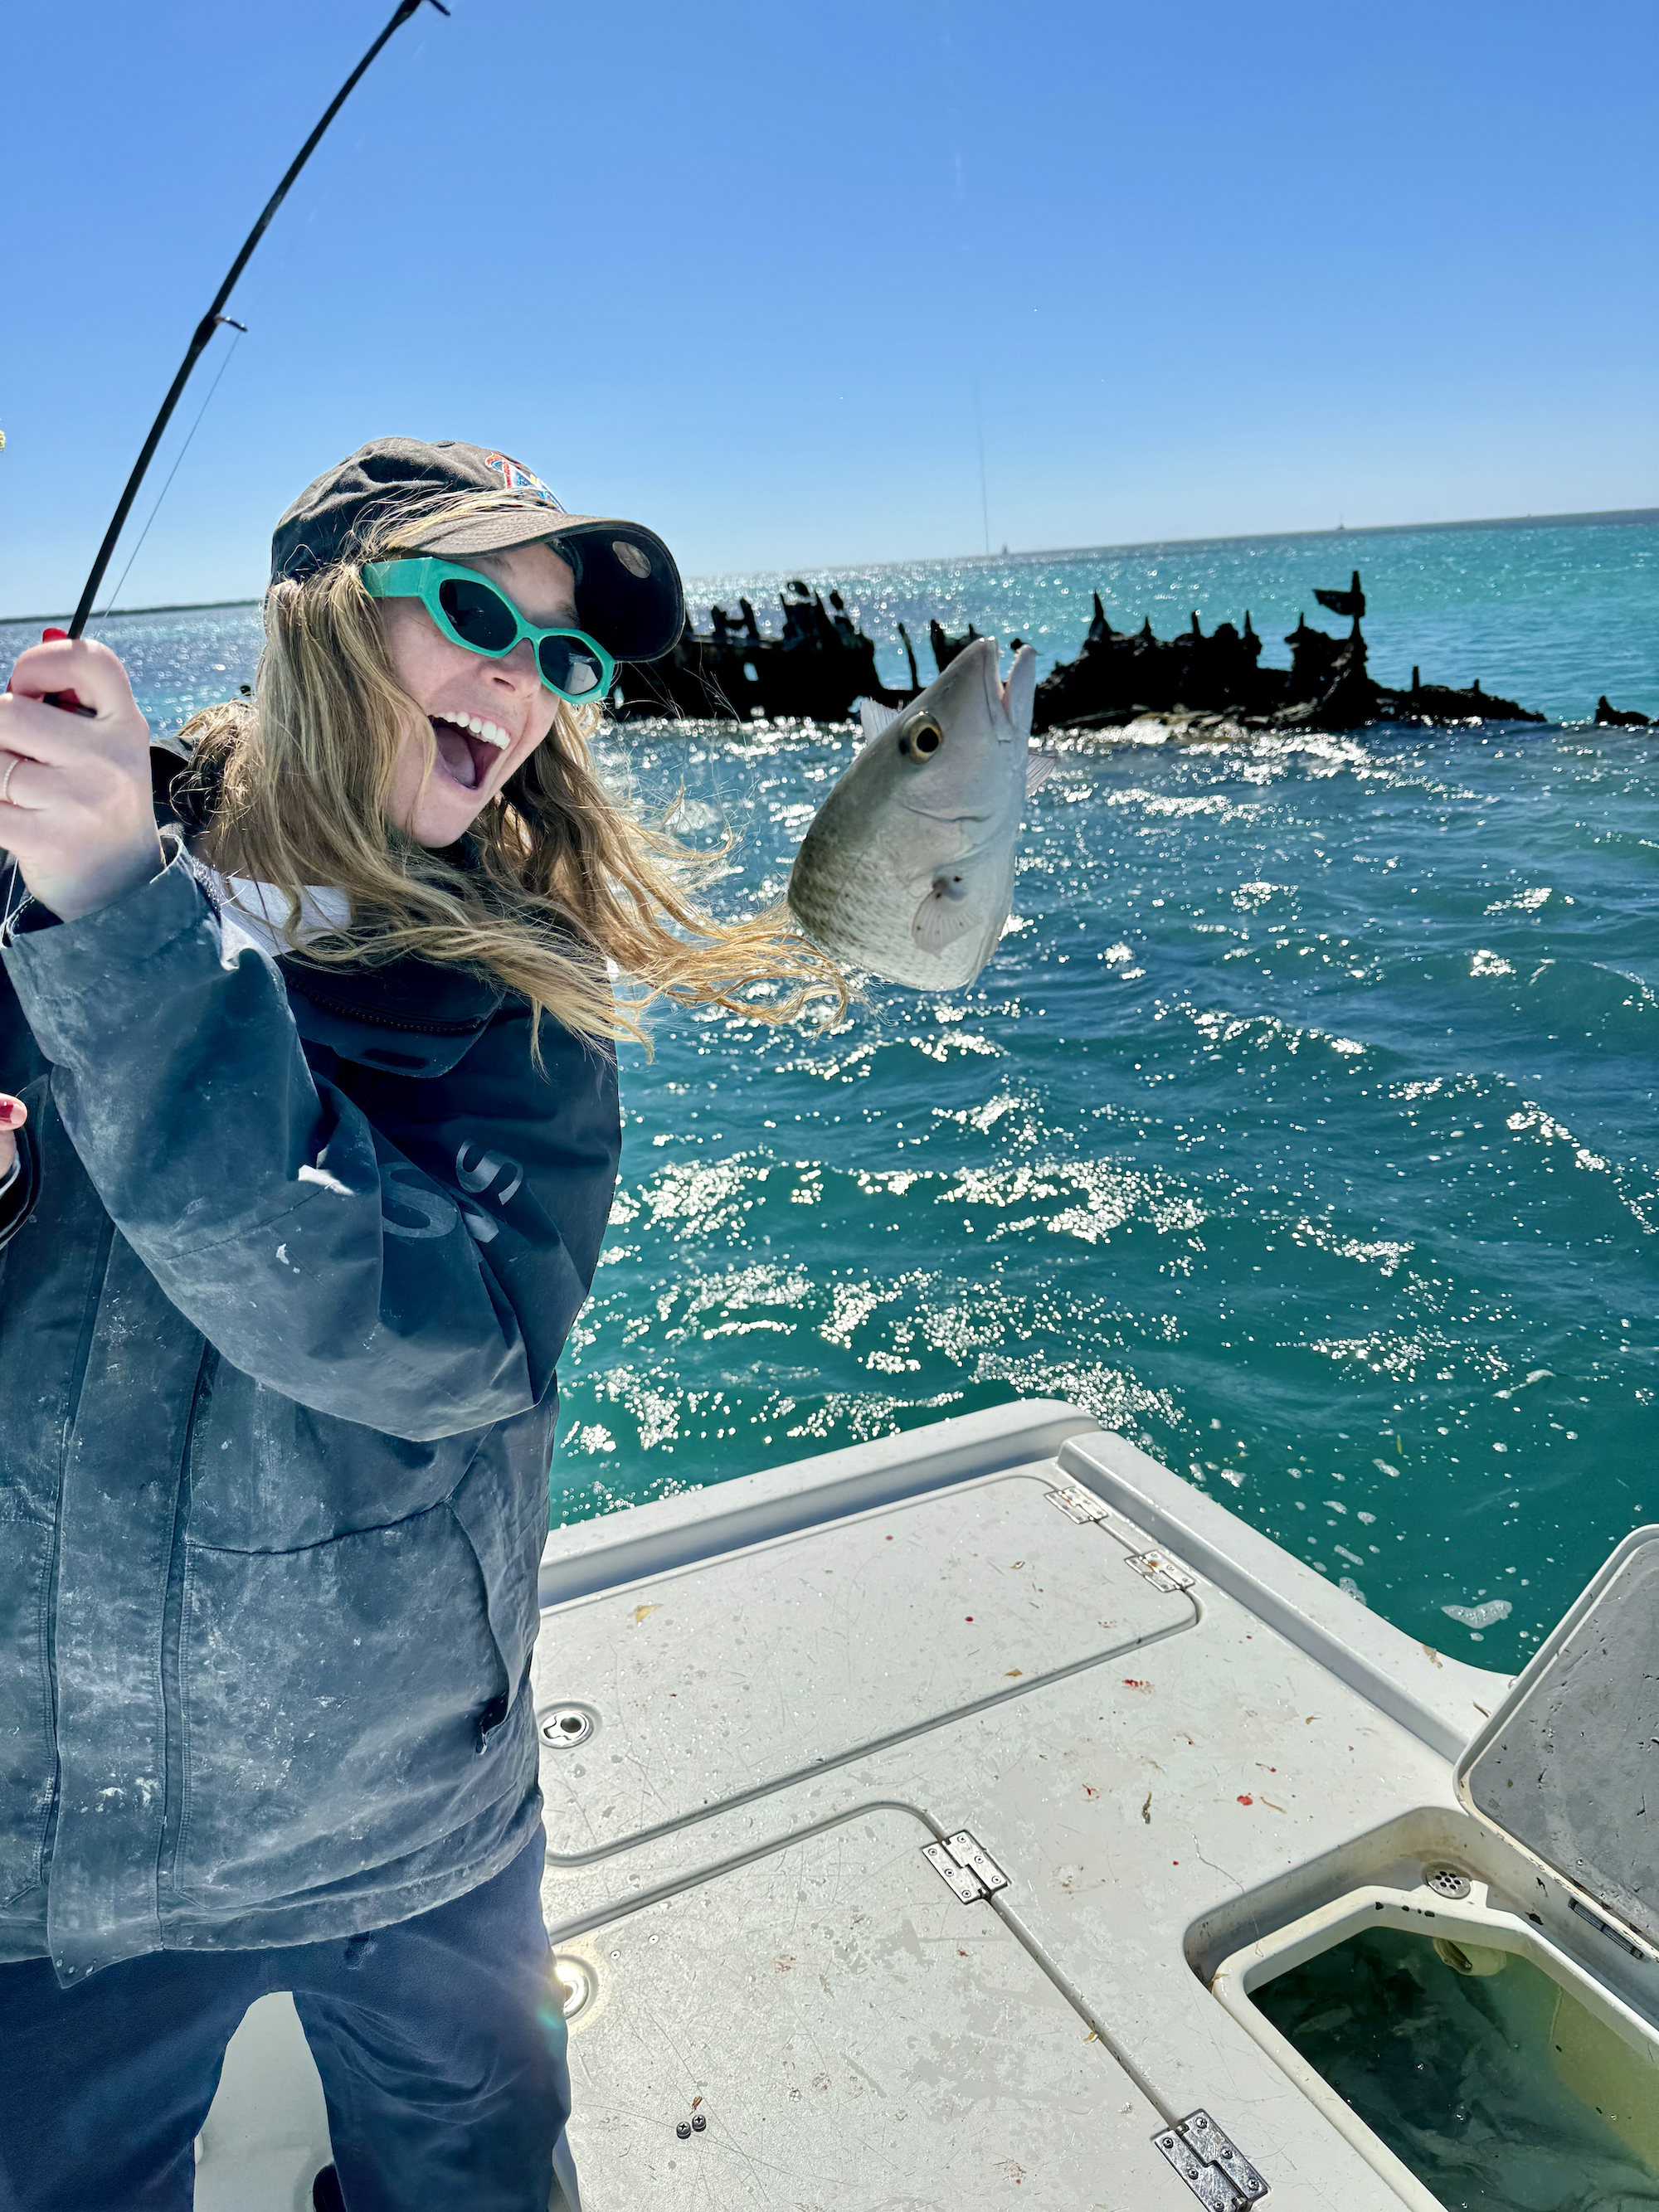 Fishing excursion in Key West